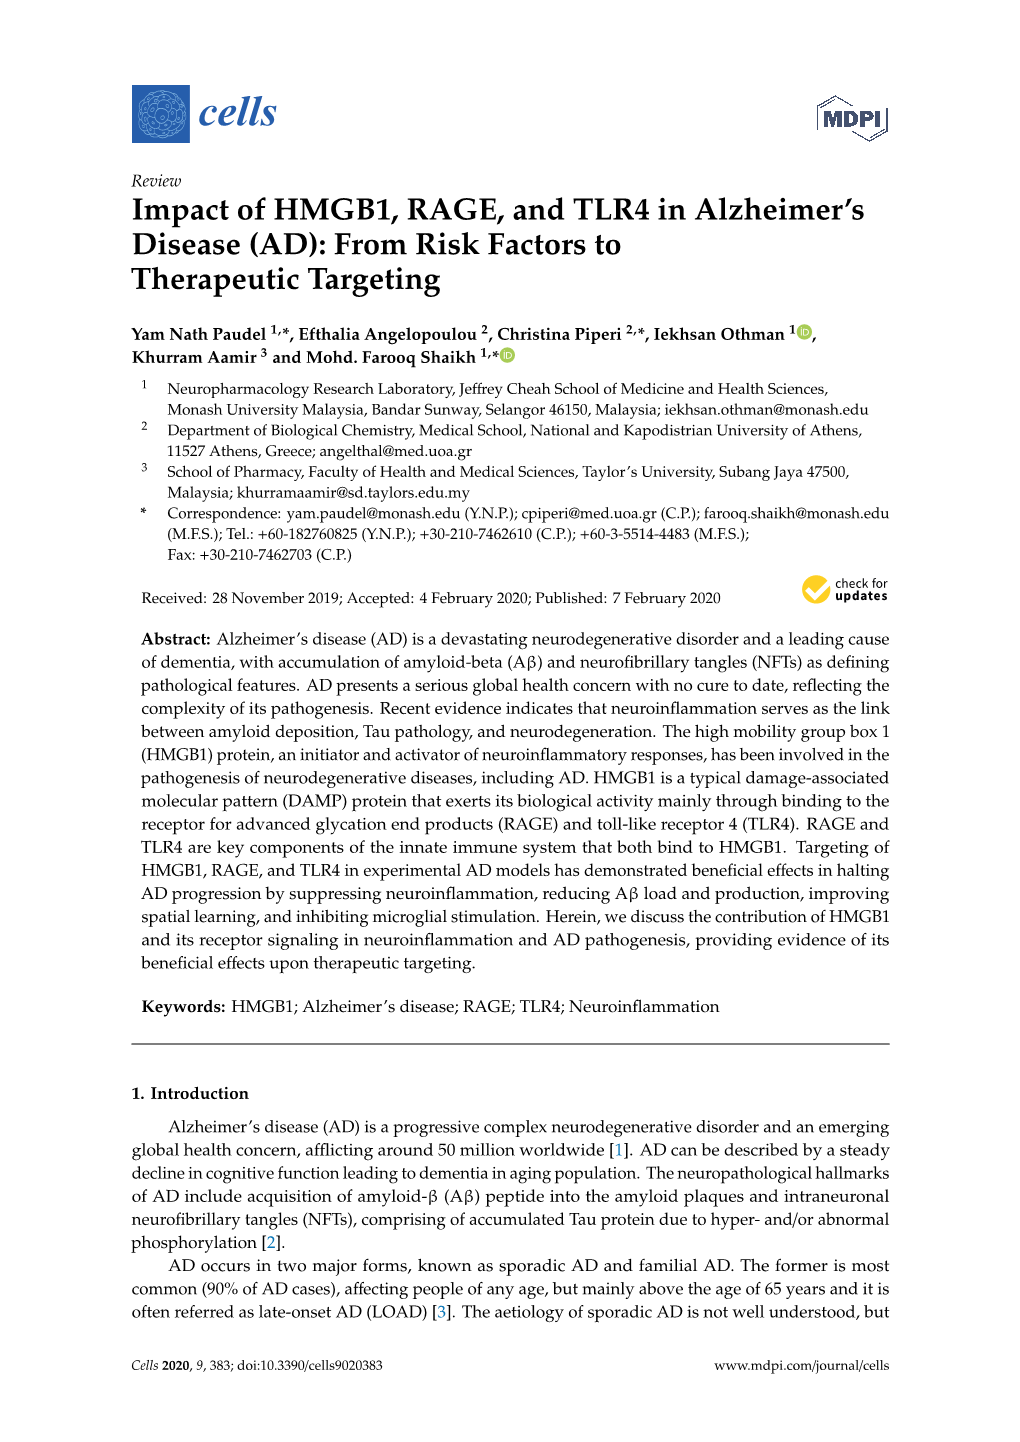 Impact of HMGB1, RAGE, and TLR4 in Alzheimer's Disease (AD)